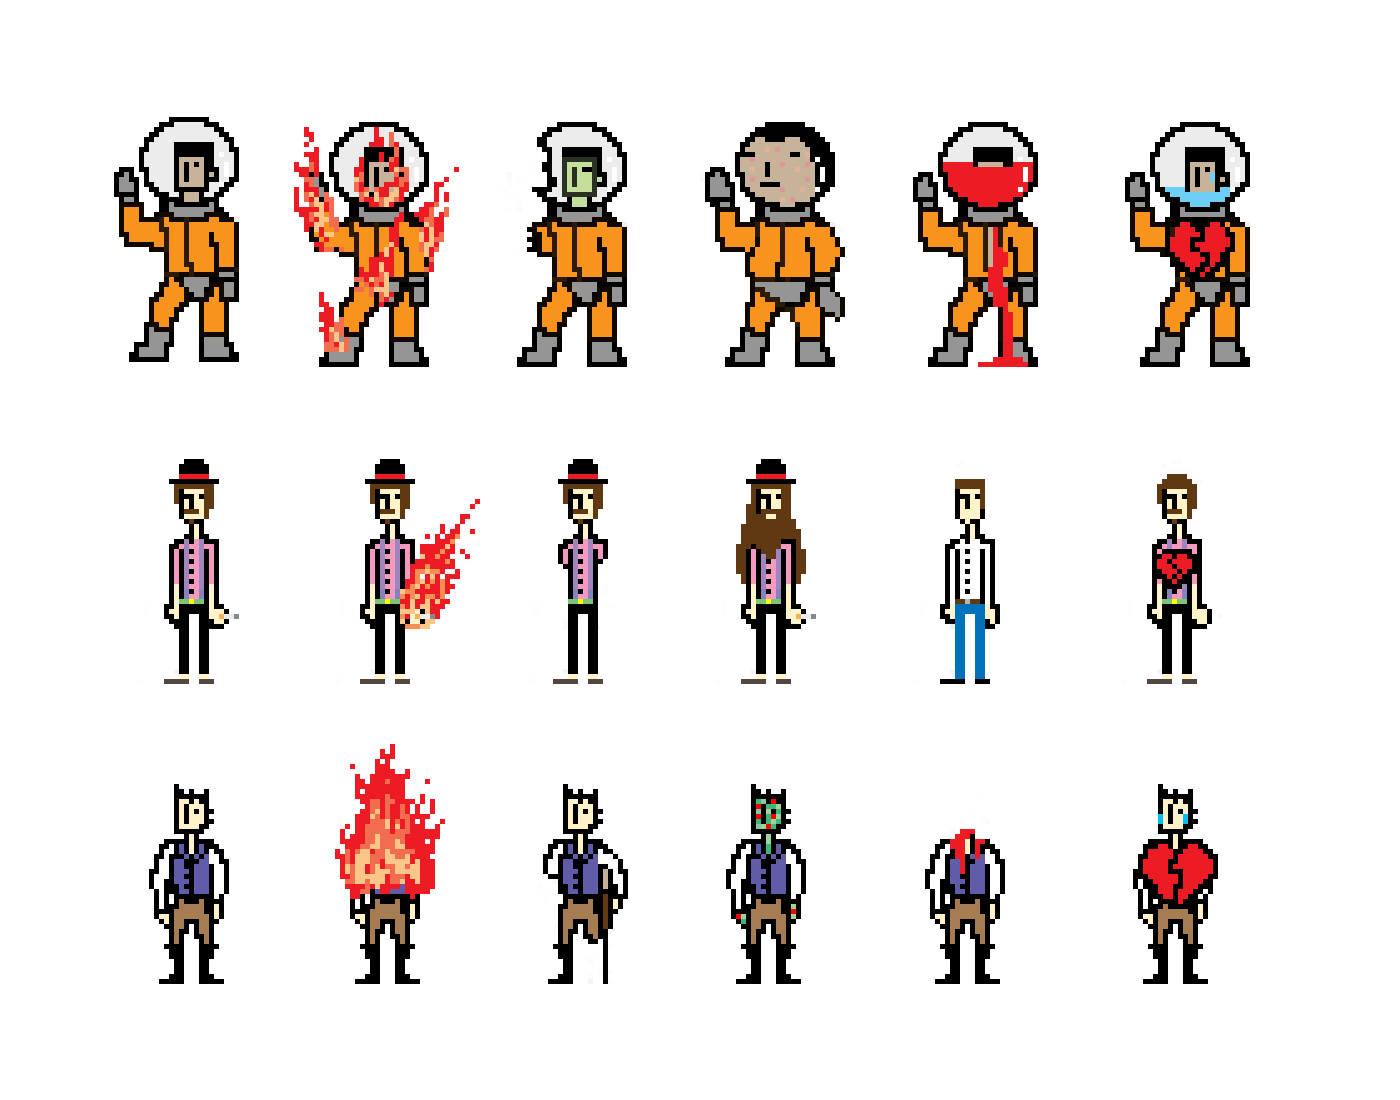 Character designs for 'Time Thing' Game Jam project